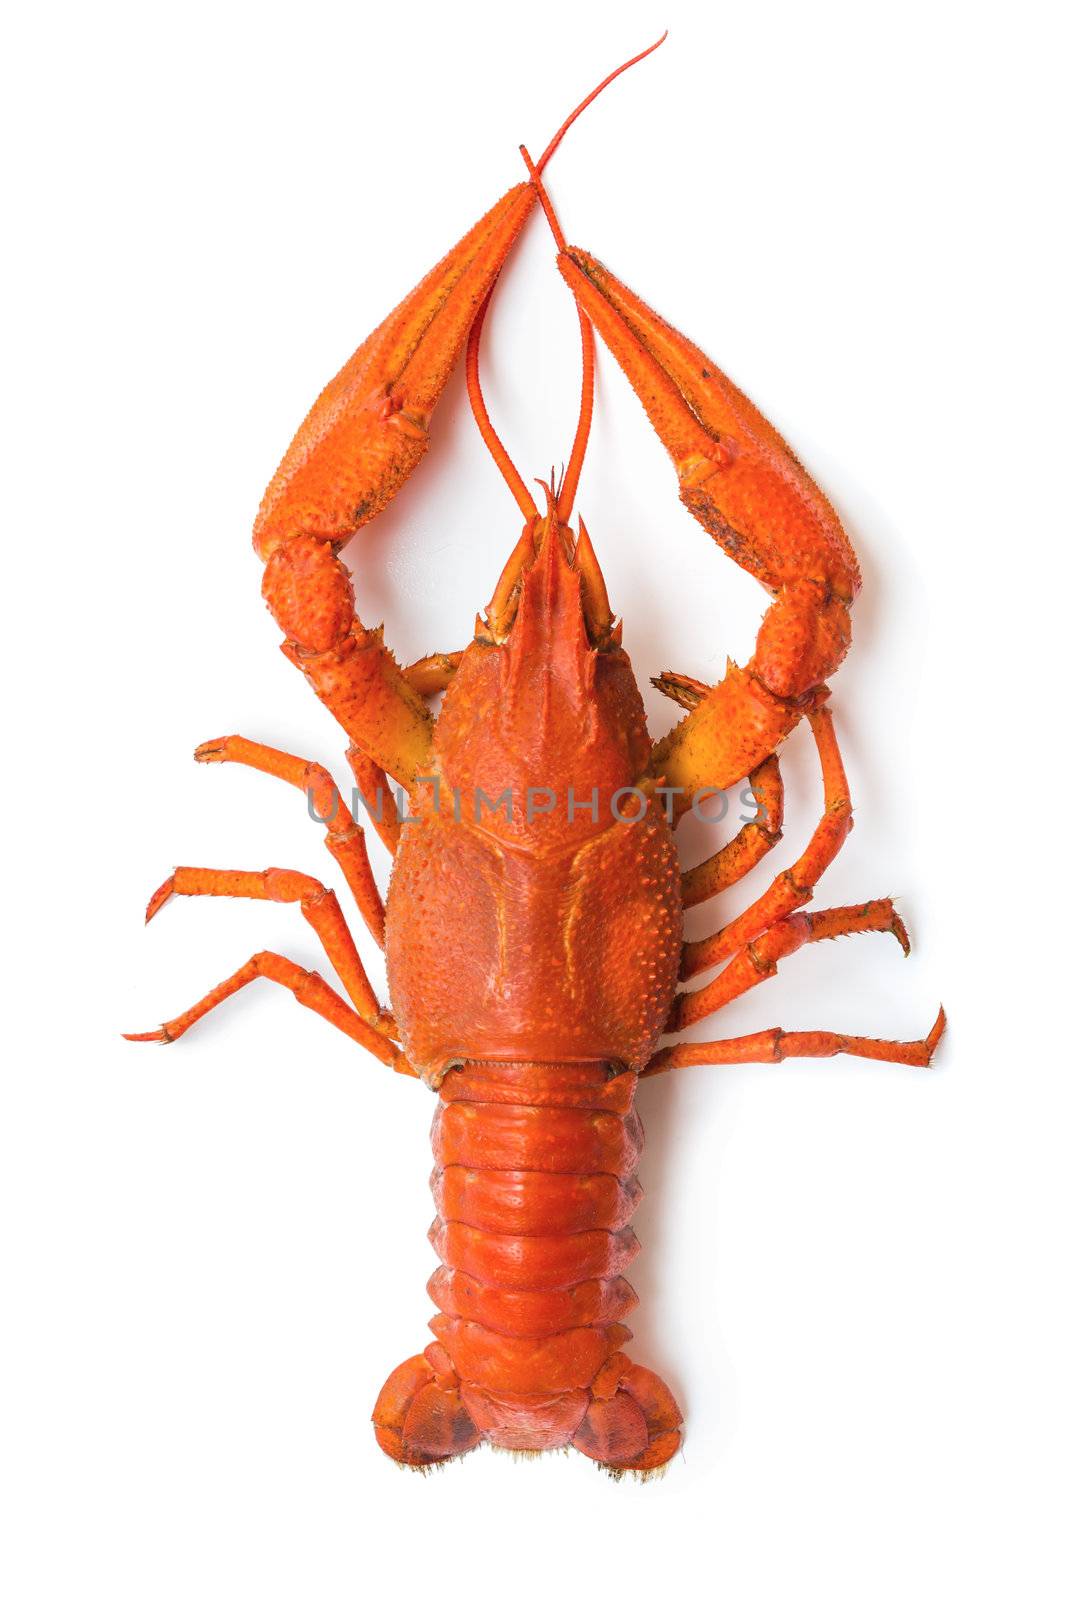 the red lobster on a white background